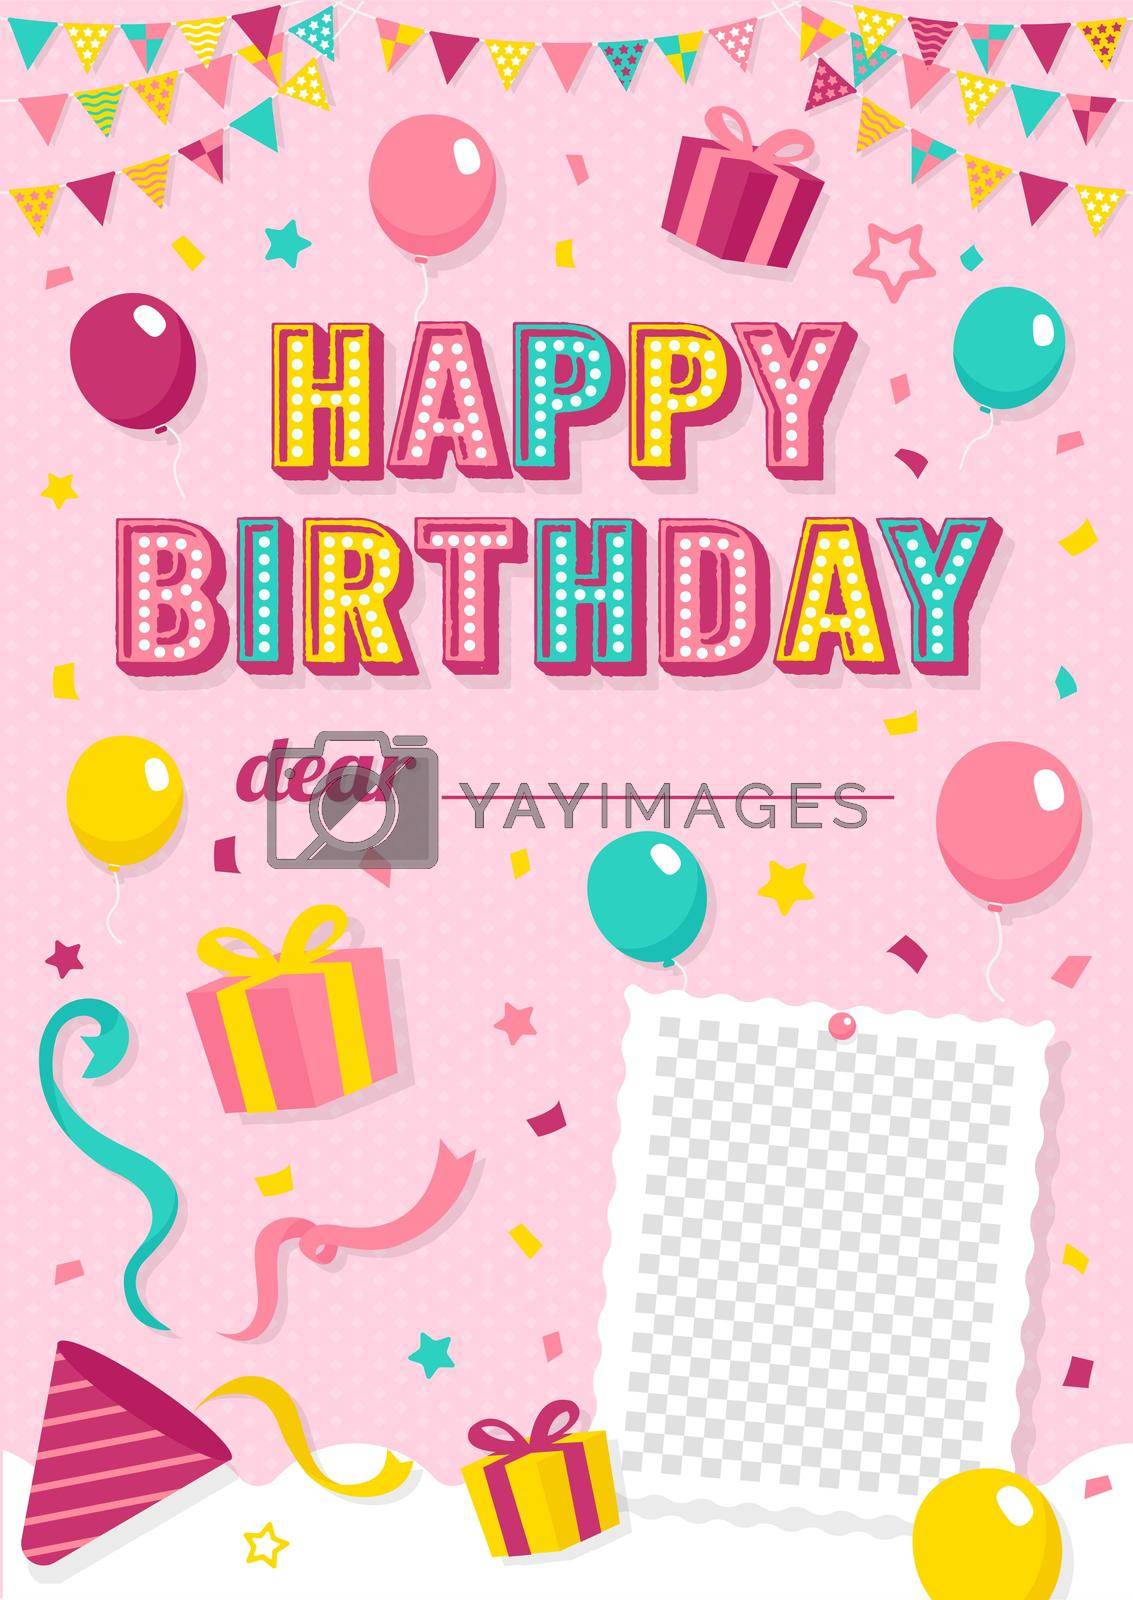 Royalty free image of Happy birthday greeting card vector illustration by barks